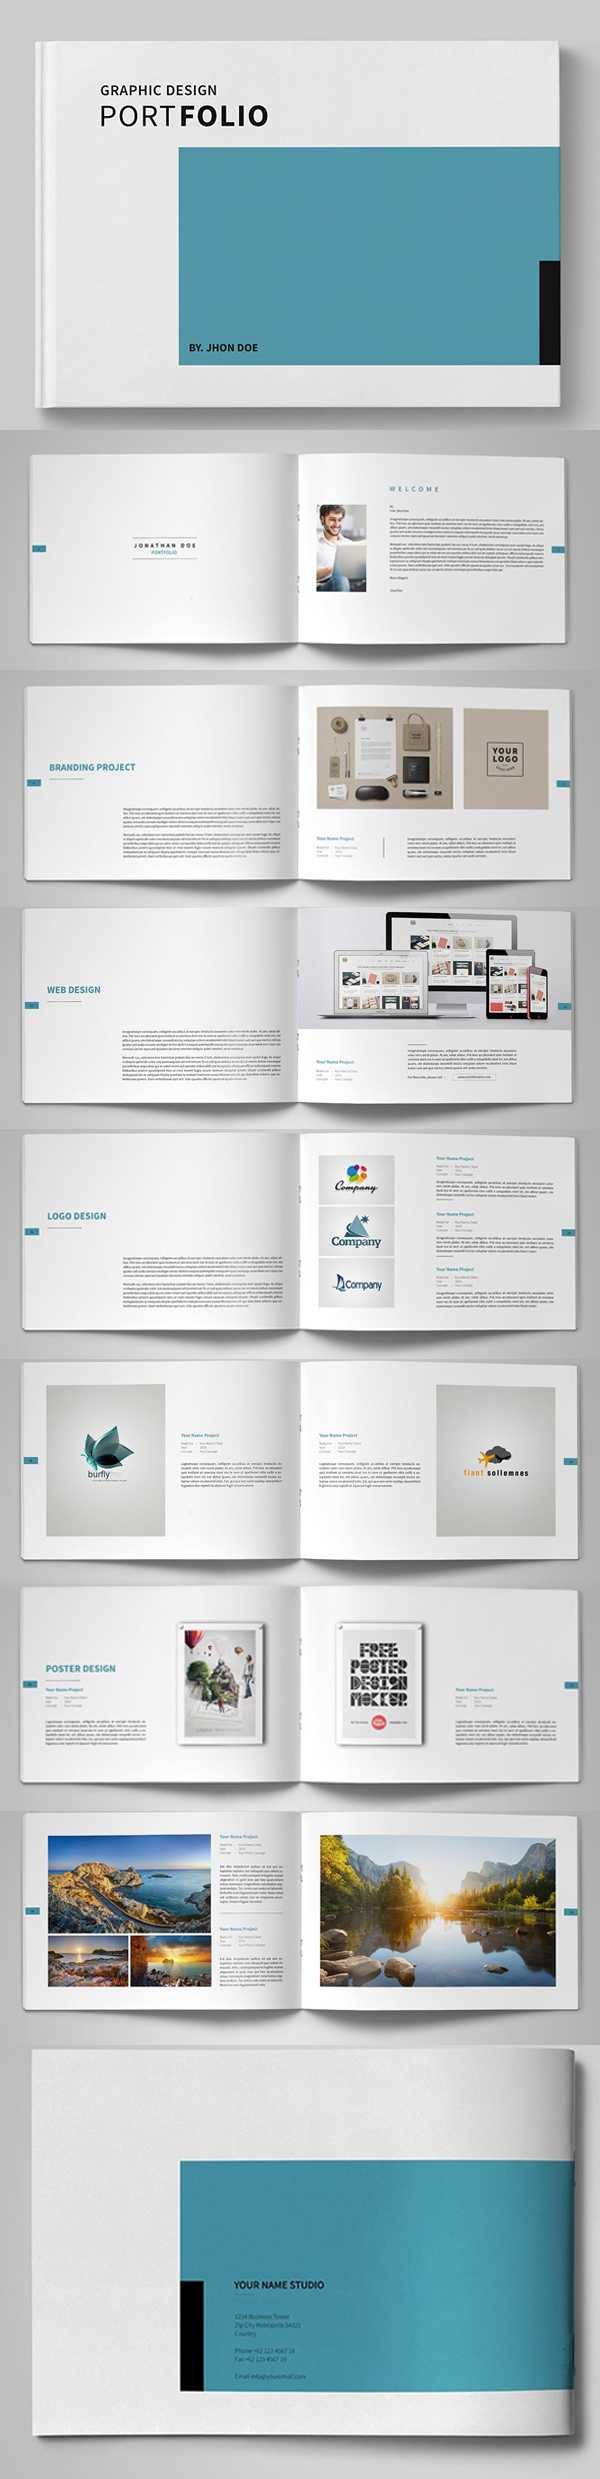 20 New Professional Catalog Brochure Templates | Design With Product Brochure Template Free